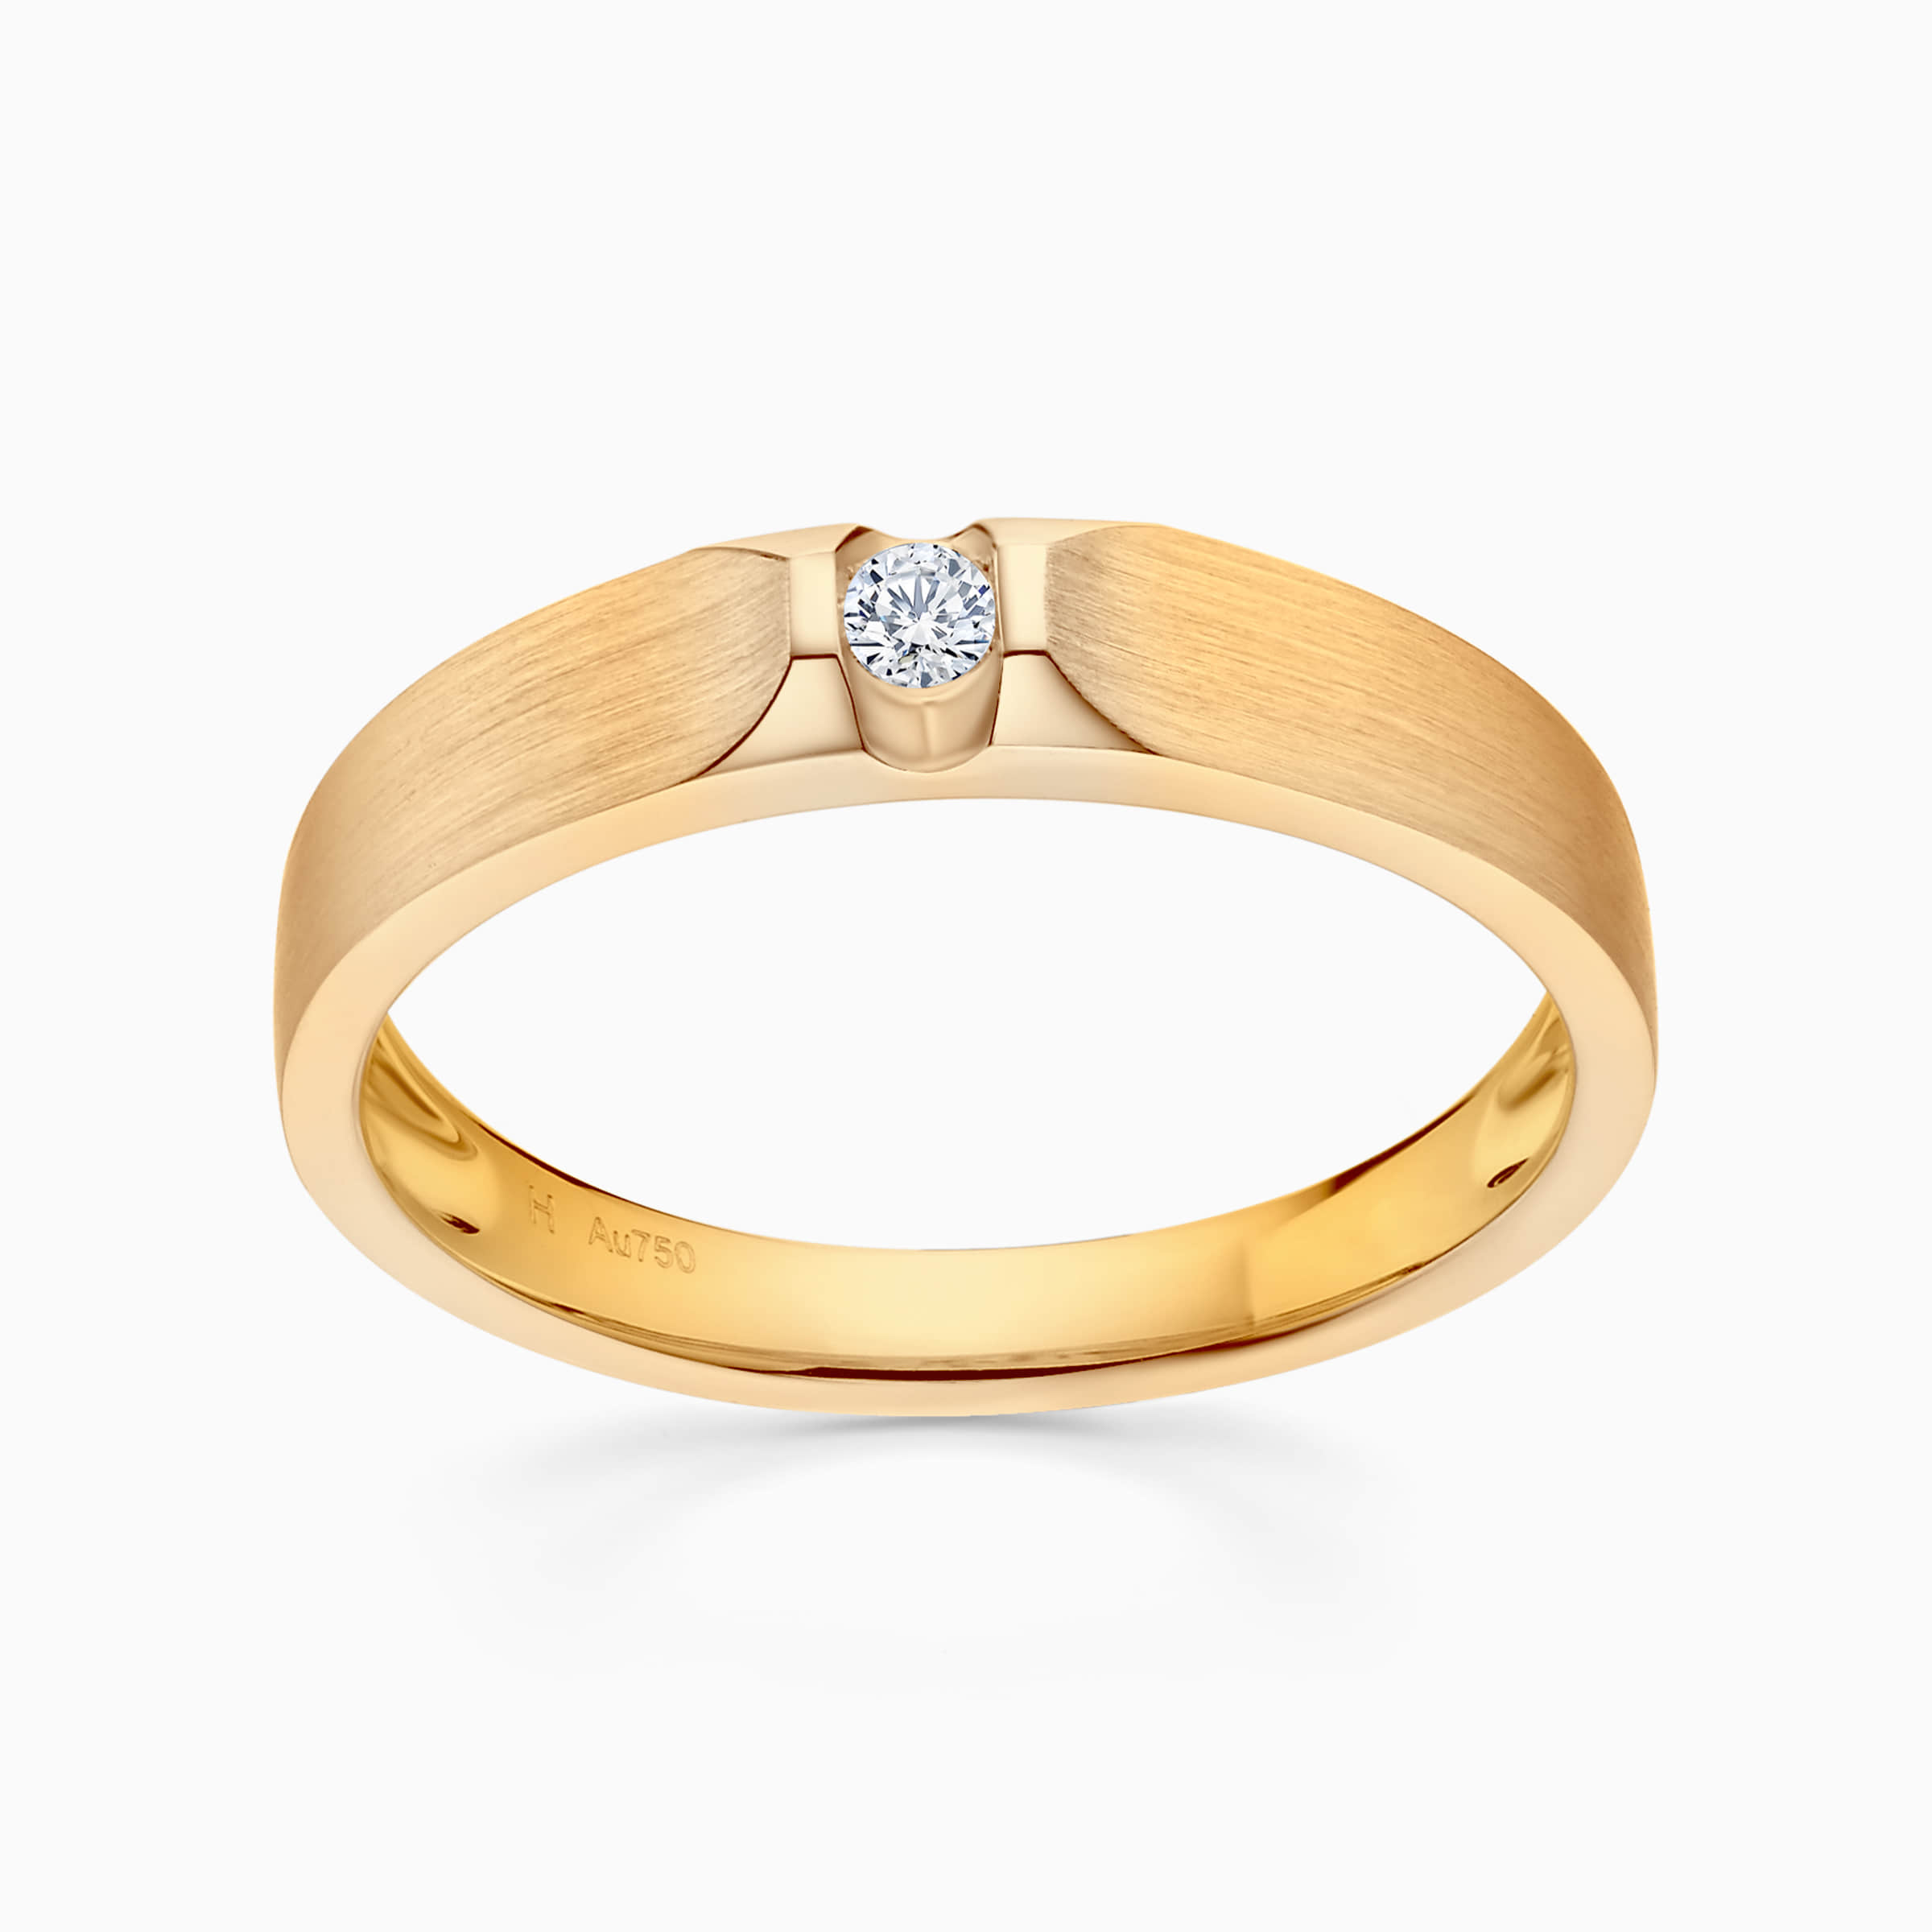 Darry Ring male wedding band in yellow gold